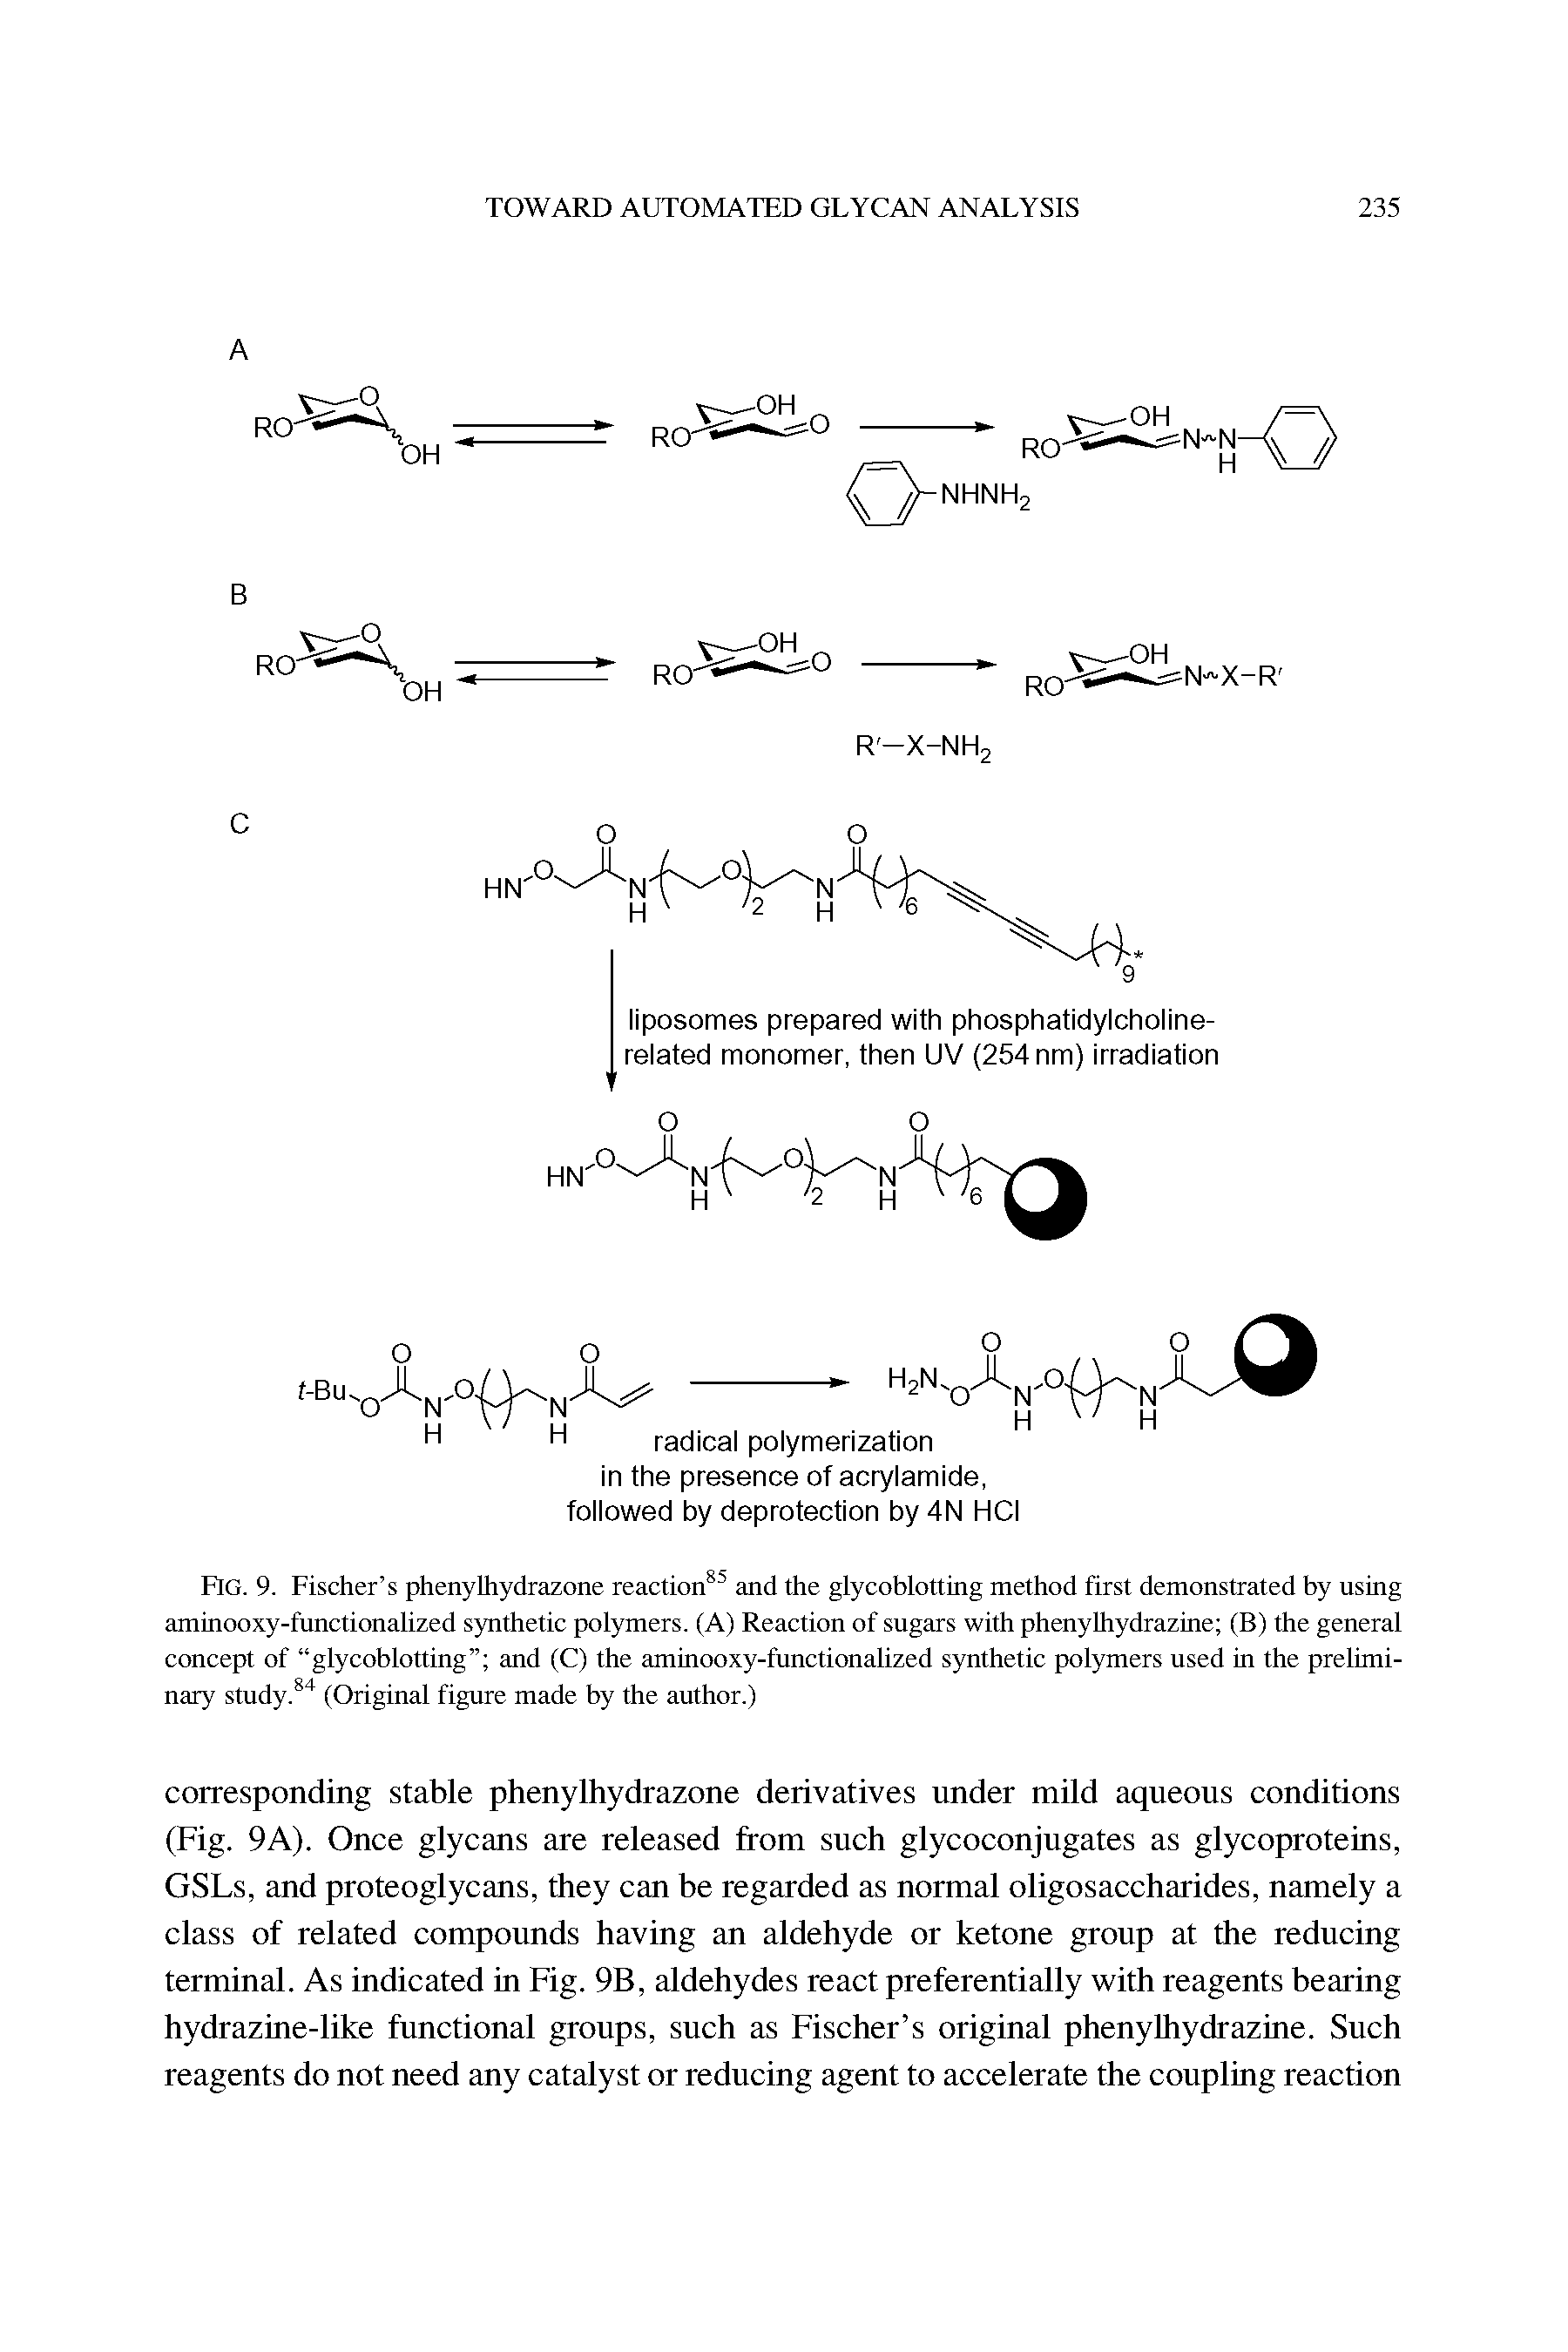 Fig. 9. Fischer s phenylhydrazone reaction85 and the glycoblotting method first demonstrated by using aminooxy-functionalized synthetic polymers. (A) Reaction of sugars with phenylhydrazine (B) the general concept of glycoblotting and (C) the aminooxy-functionalized synthetic polymers used in the preliminary study.84 (Original figure made by the author.)...